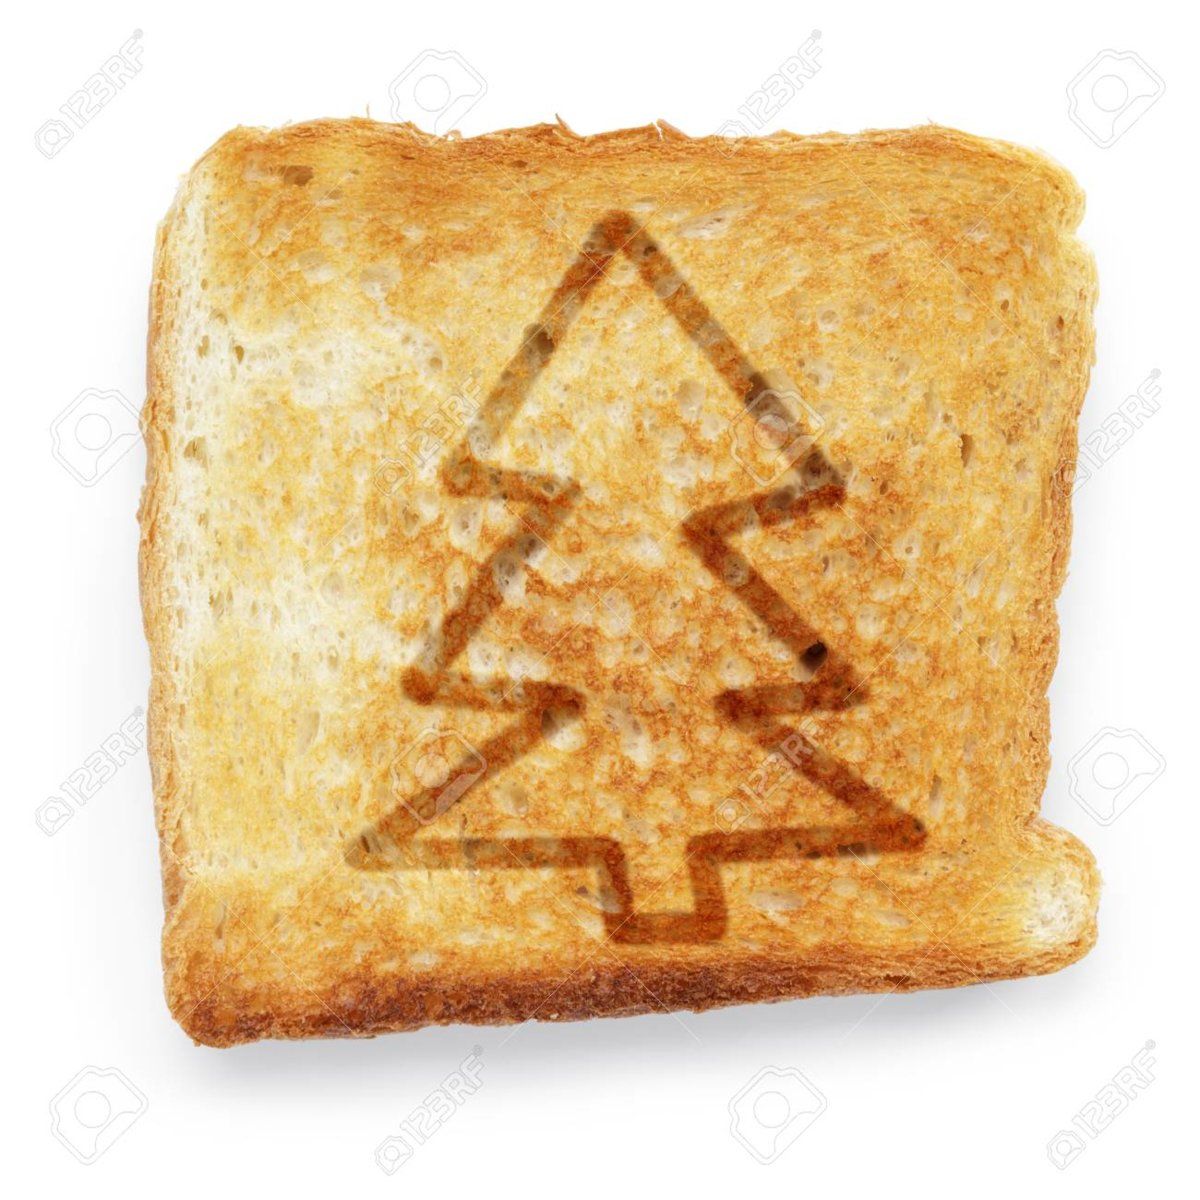 22877004-toasted-slice-of-white-bread-with-christmas-tree.jpg